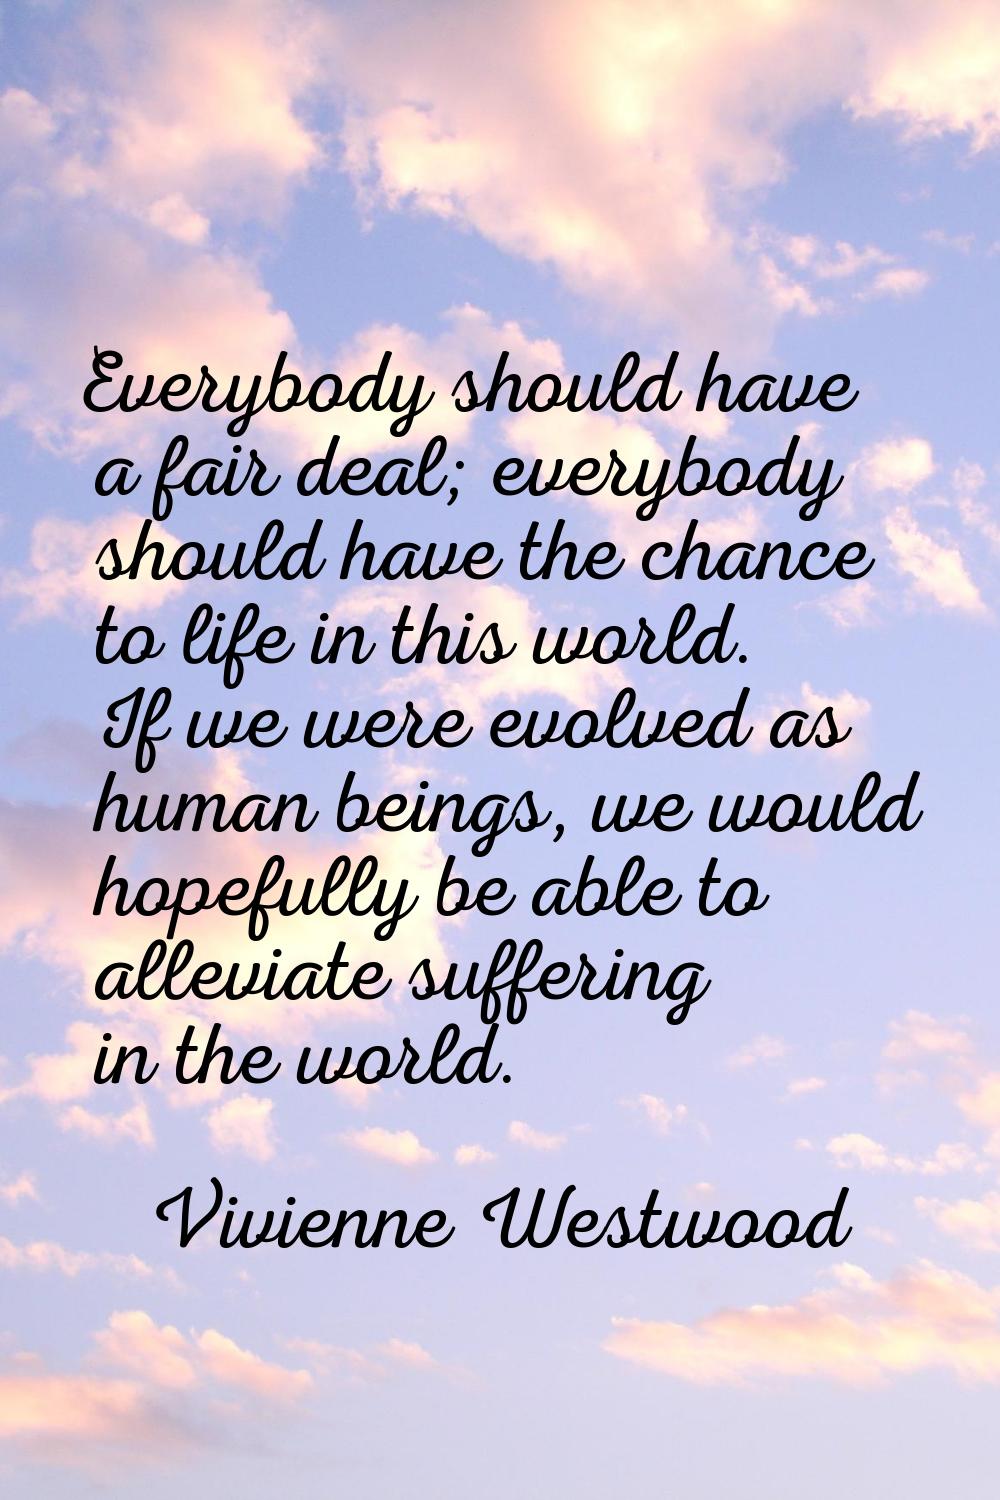 Everybody should have a fair deal; everybody should have the chance to life in this world. If we we